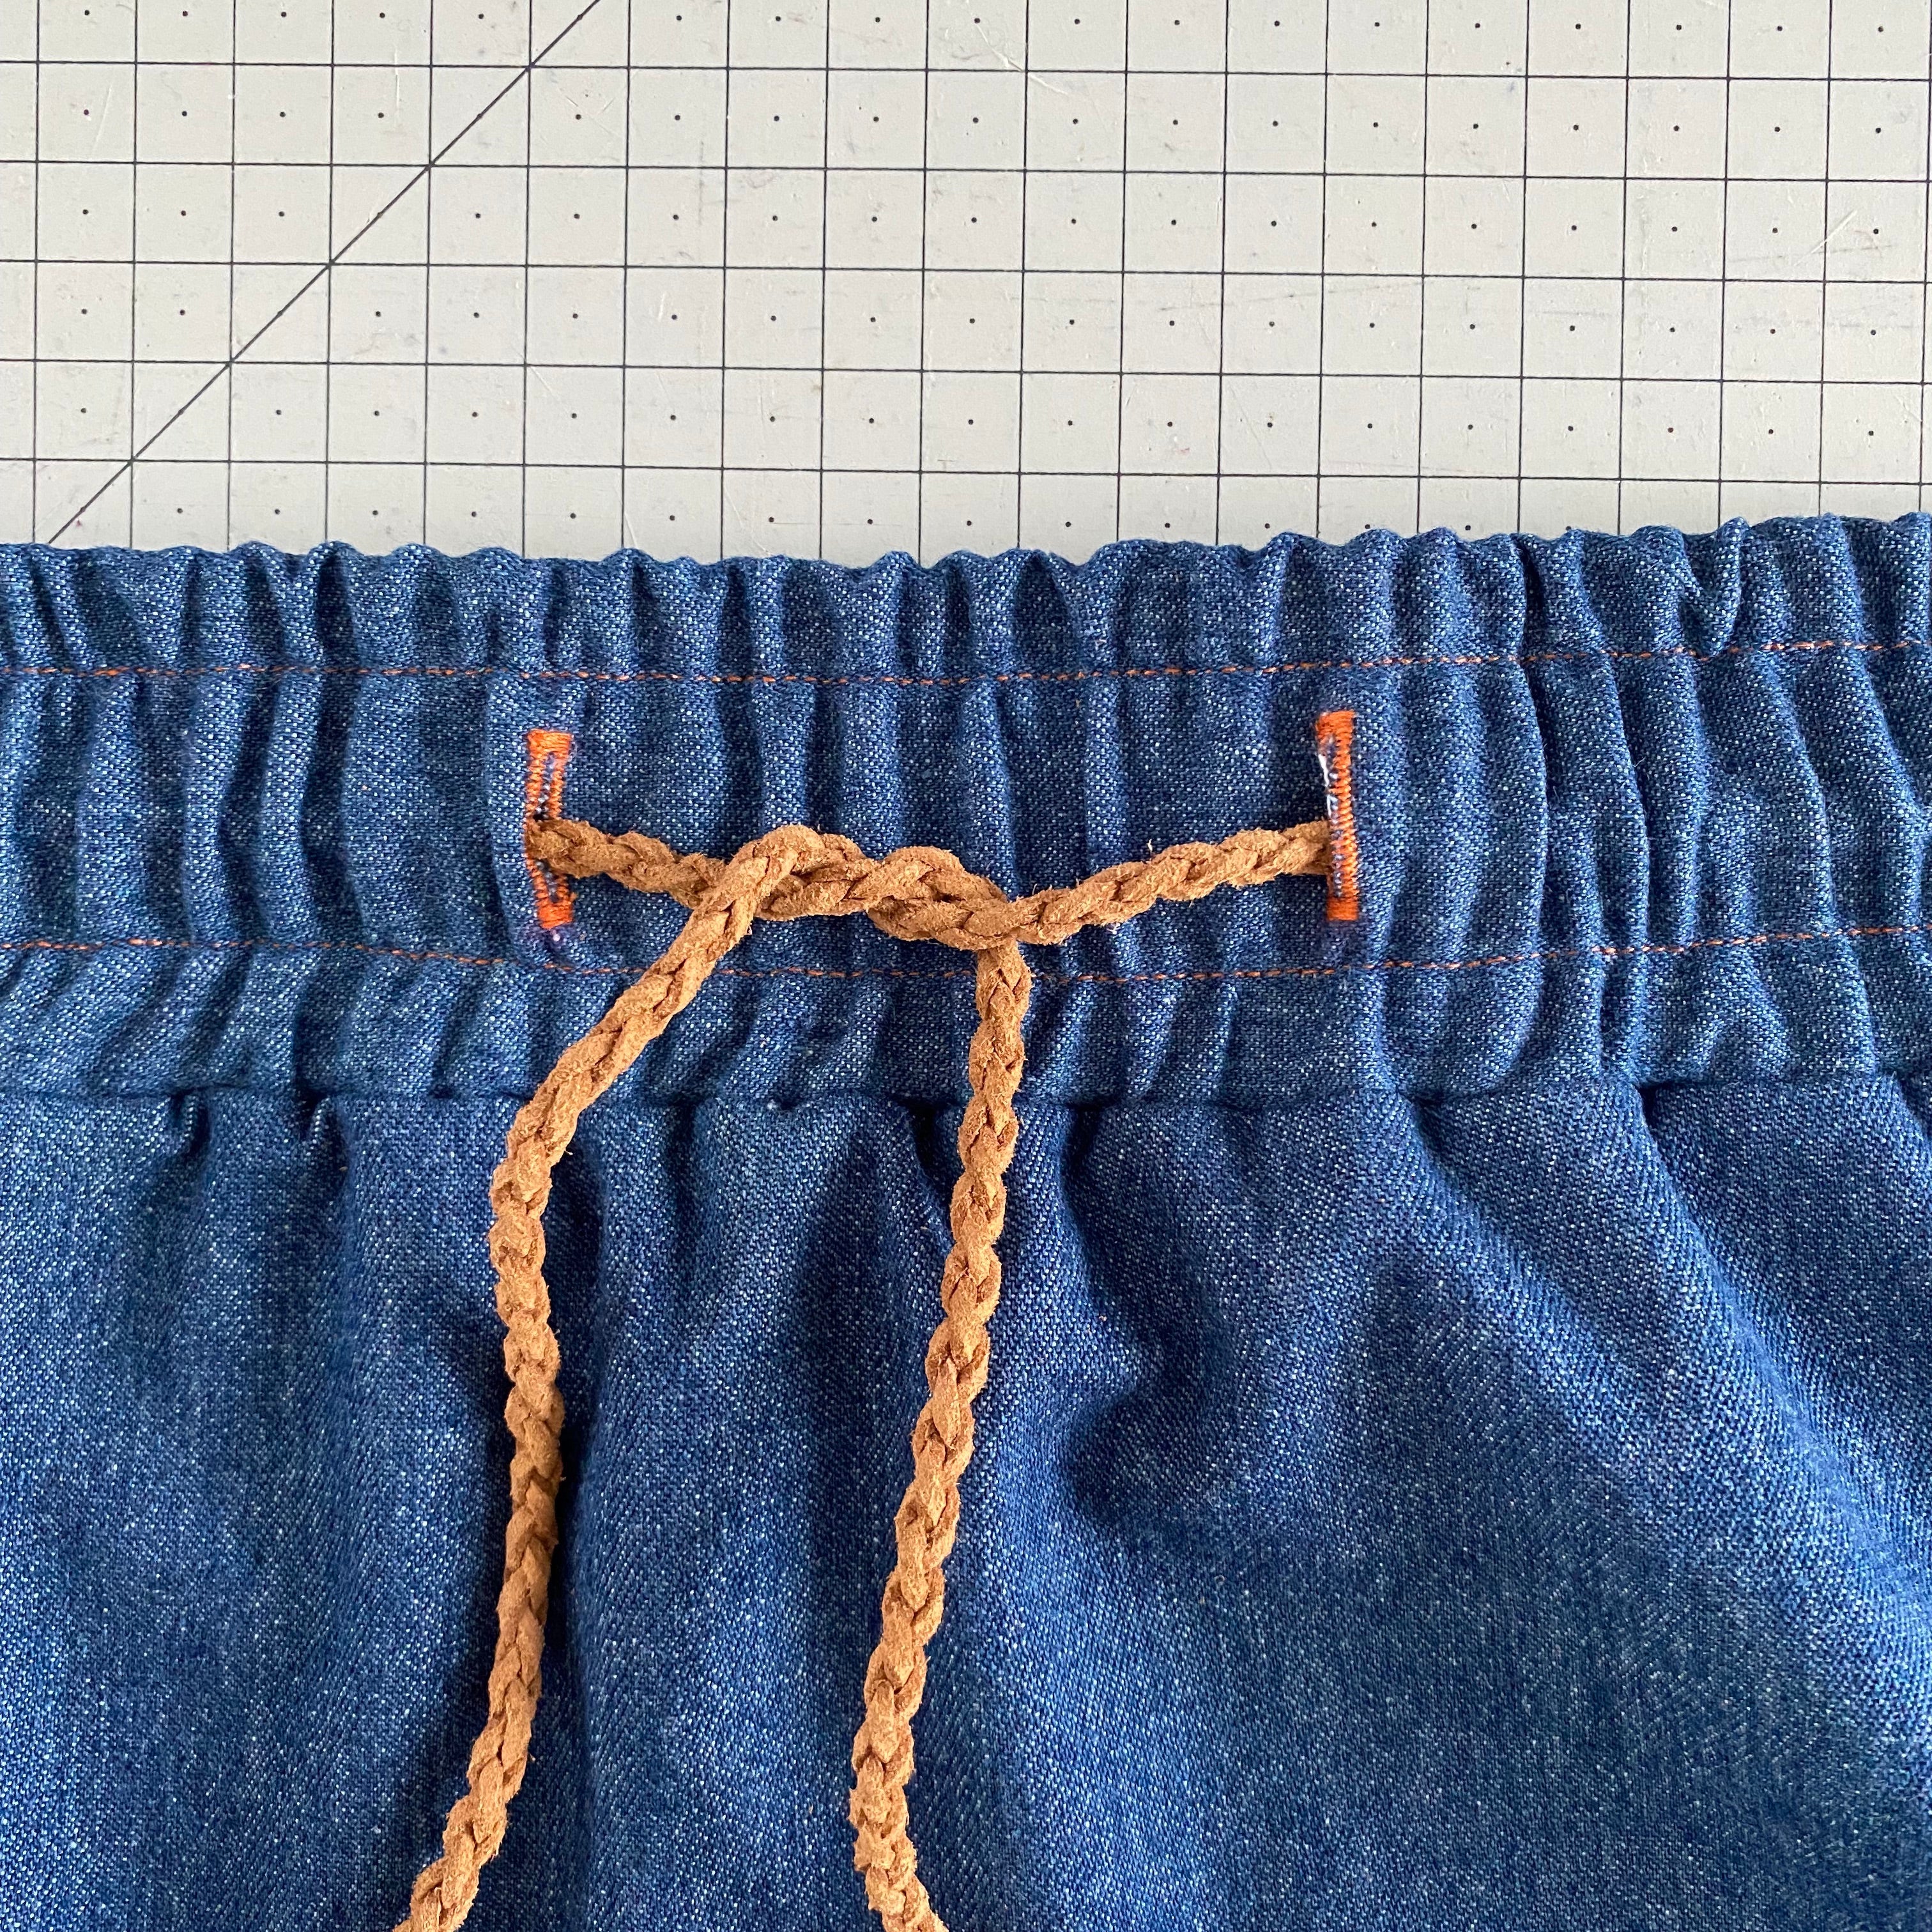 Drawstring Pants: How to make easy pattern and sew 